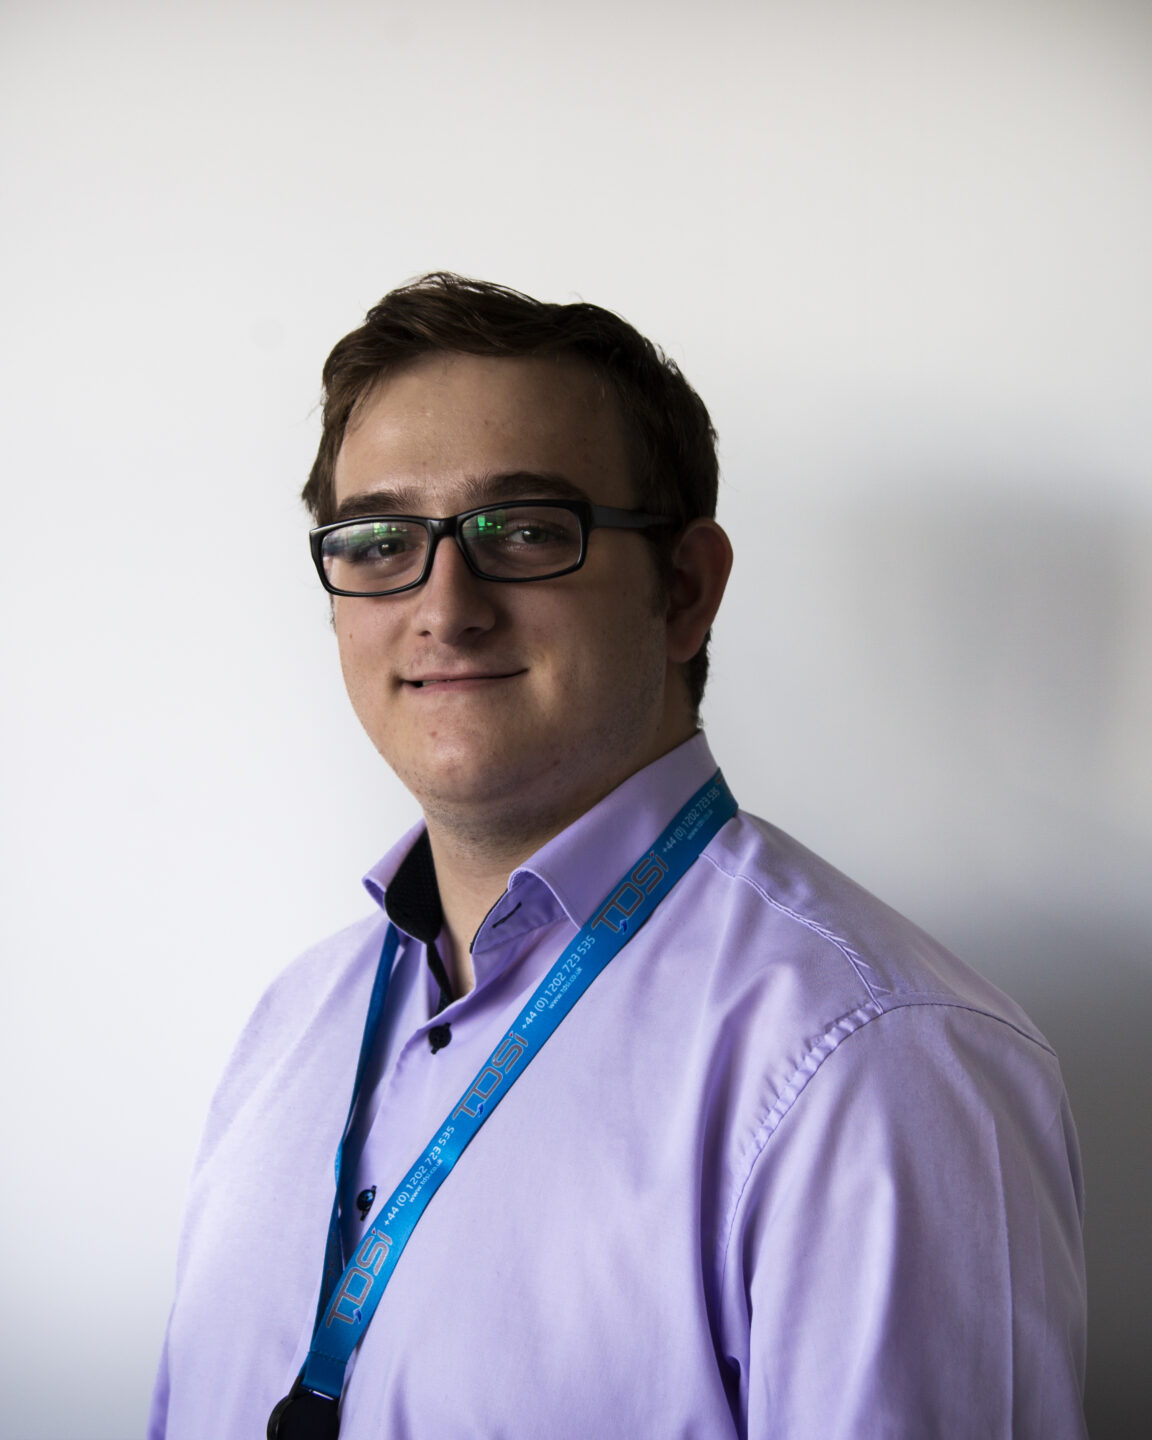 TDSi Welcomes New Placement Student to its Software Development Team